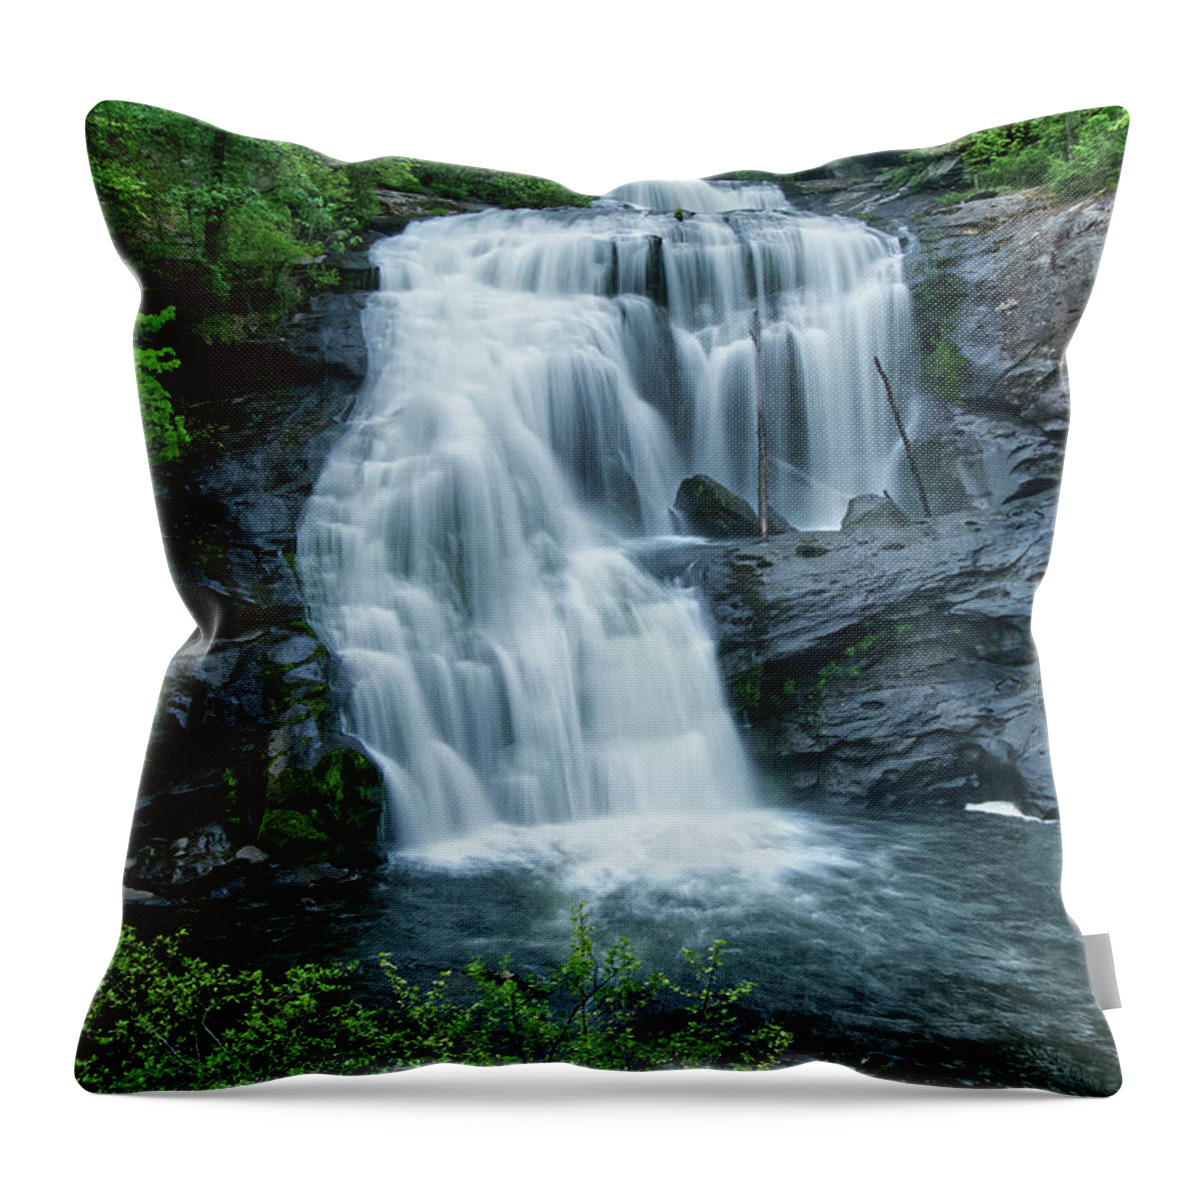 Cherokee National Forest Throw Pillow featuring the photograph Bald River Falls 41 by Phil Perkins